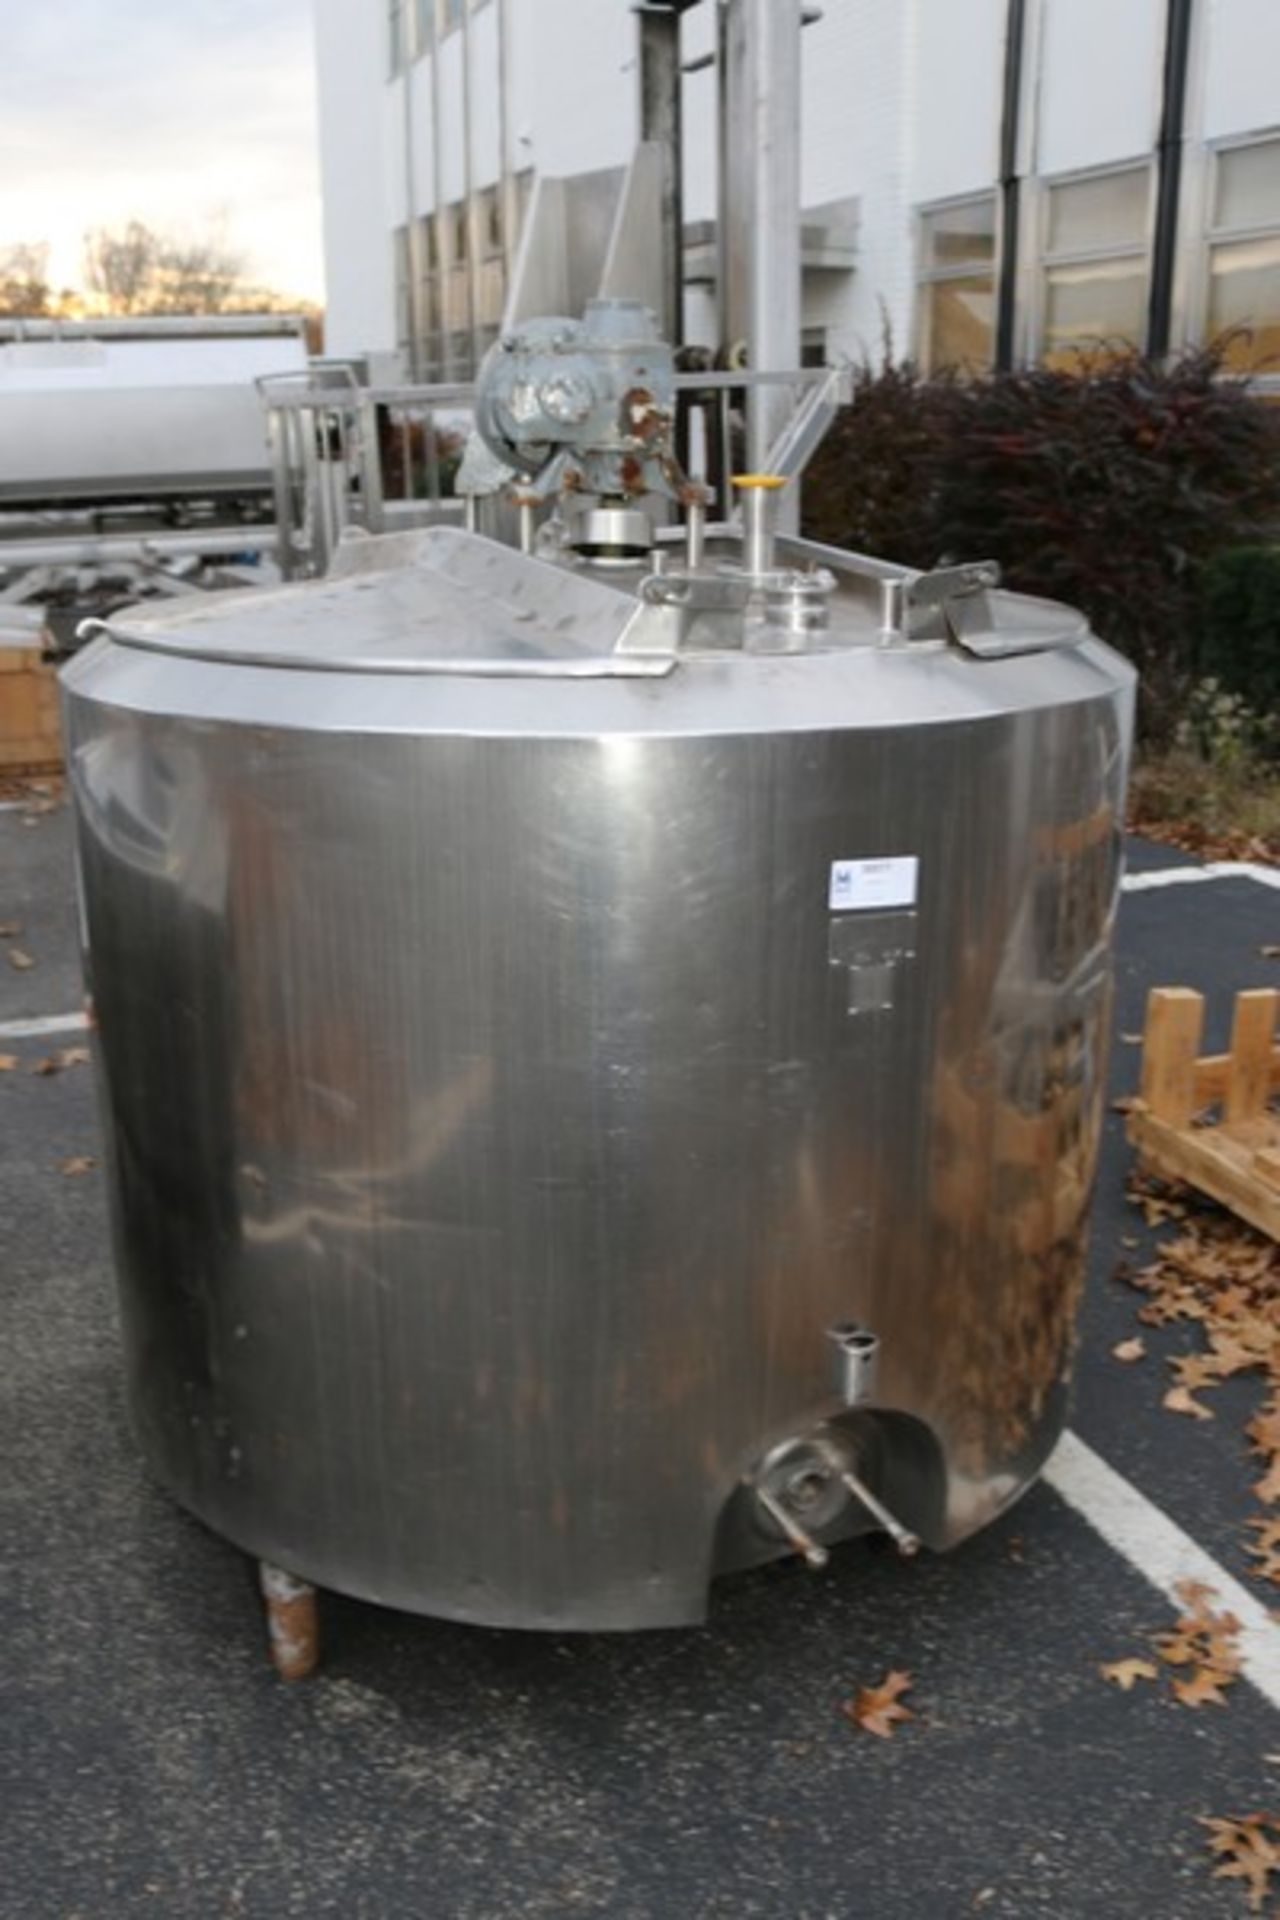 Creamery Package 300 Gal. Insulated Vertical S/STank, S/N 8117, with Top Mounted Agitation Motor,